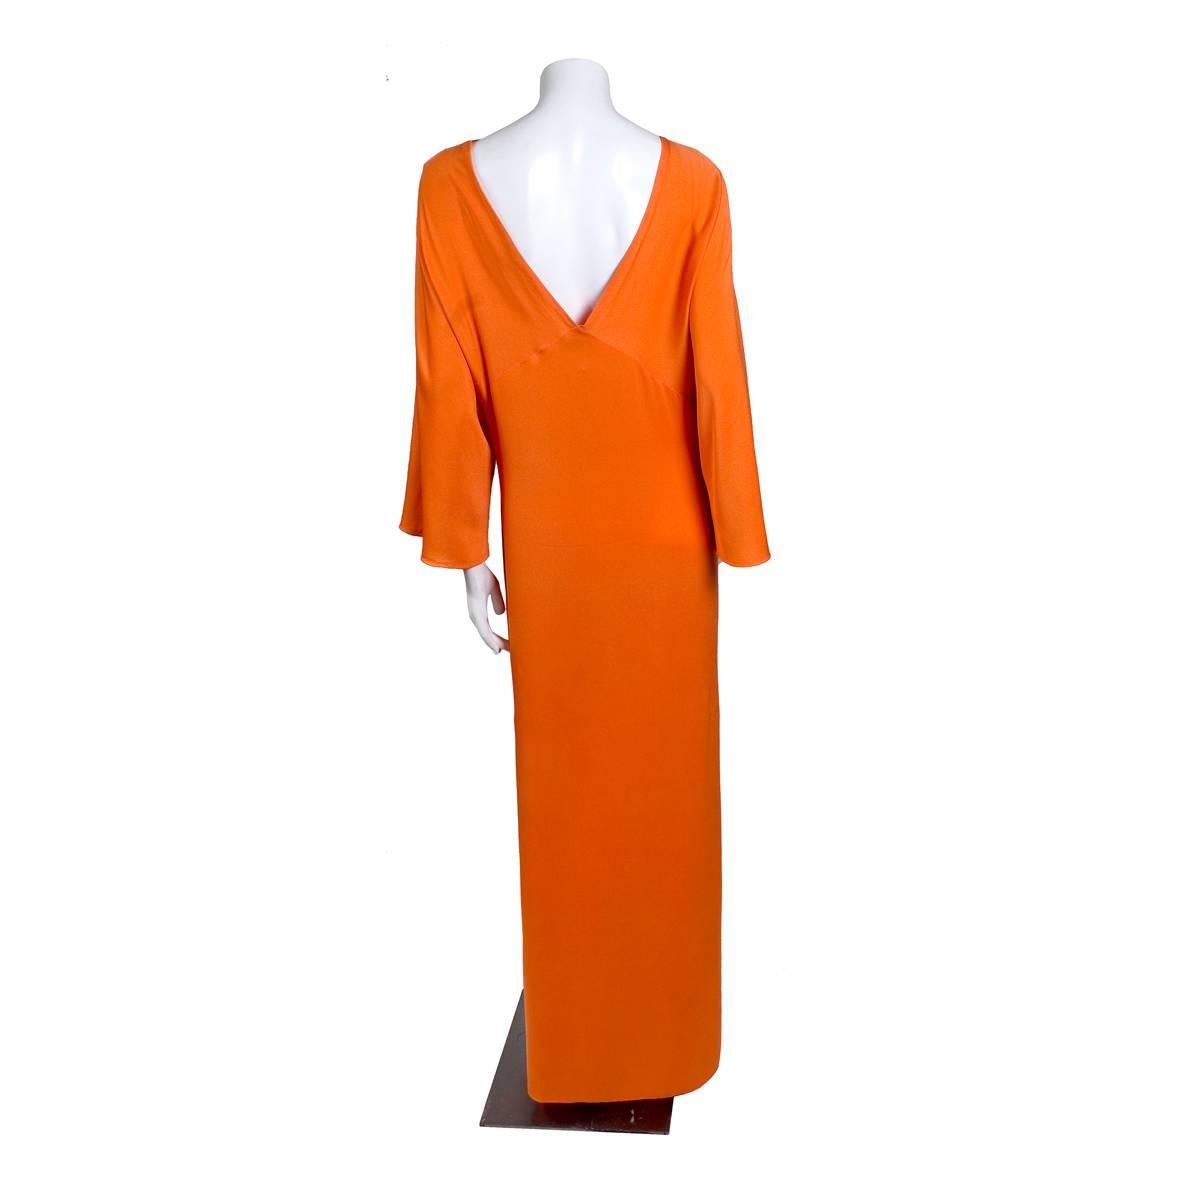 Dress by Halston circa 1970s
Bias cut
V neckline in front and back
Batwing sleeves
Side slit
Condition: Excellent vintage condition

Size/Measurements:
Can fit a size 2-8 approximately
